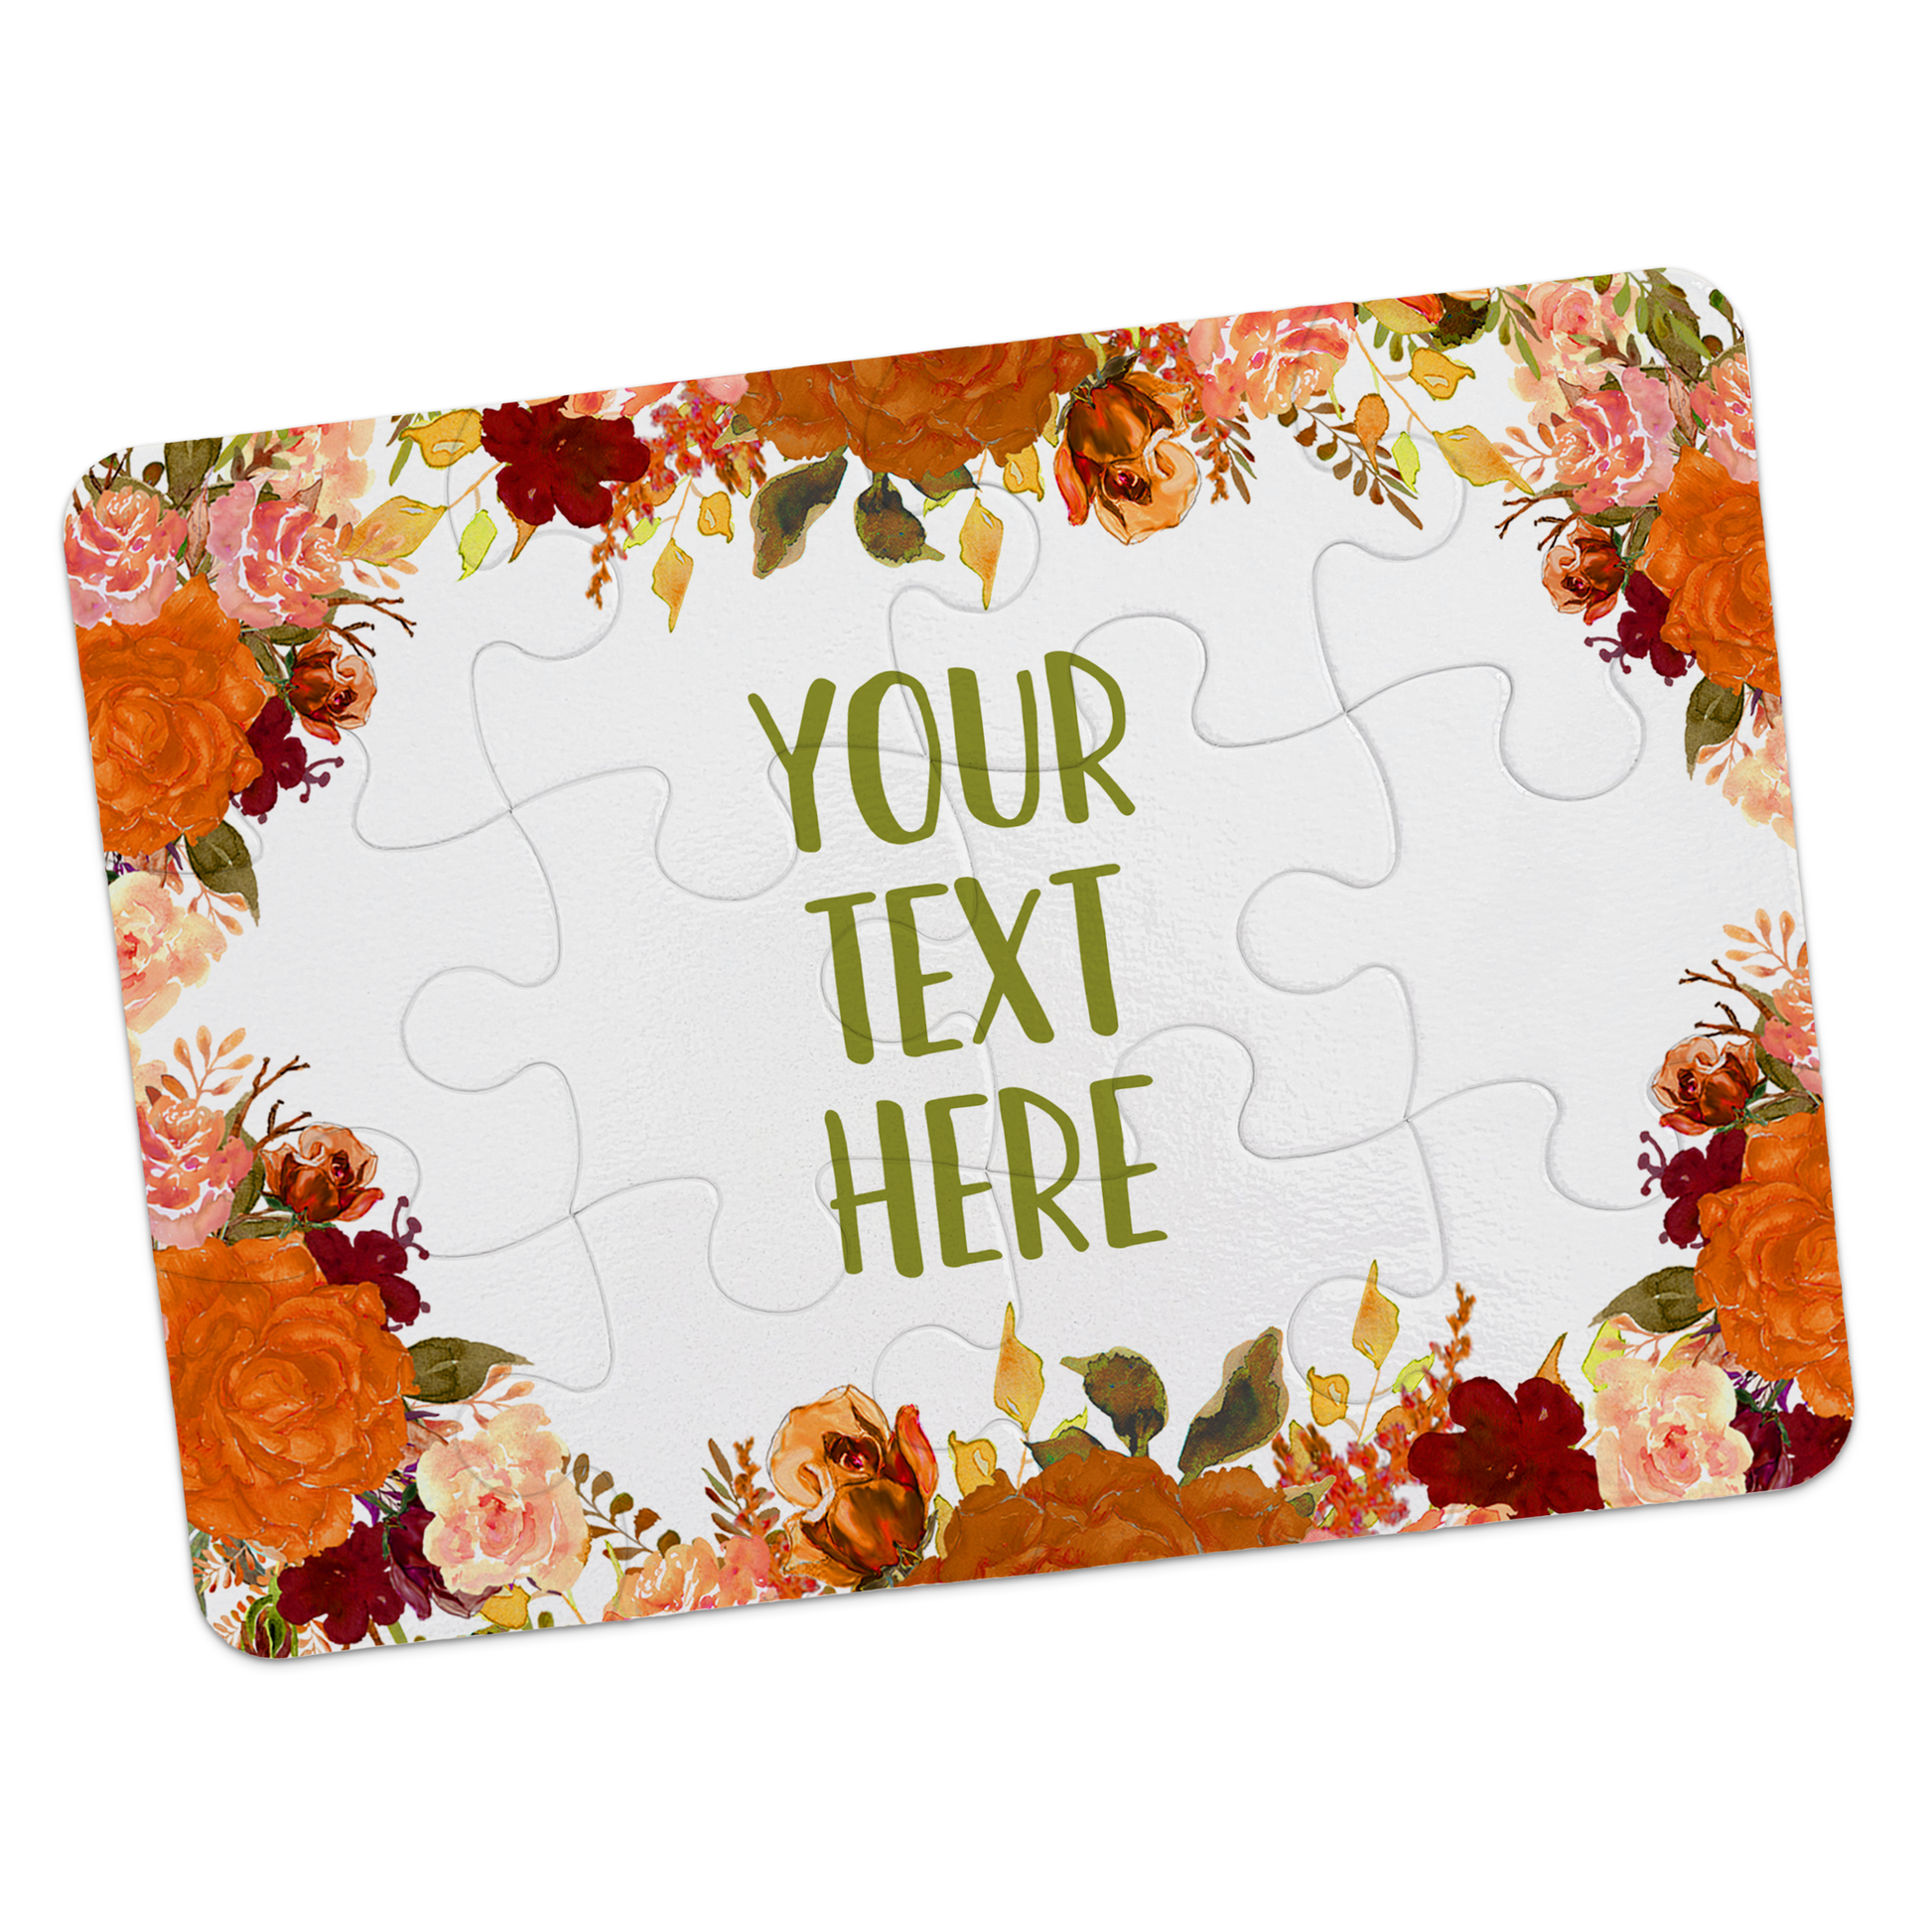 Create Your Own Puzzle - Floral Design - CYOP0275 | S'Berry Boutique